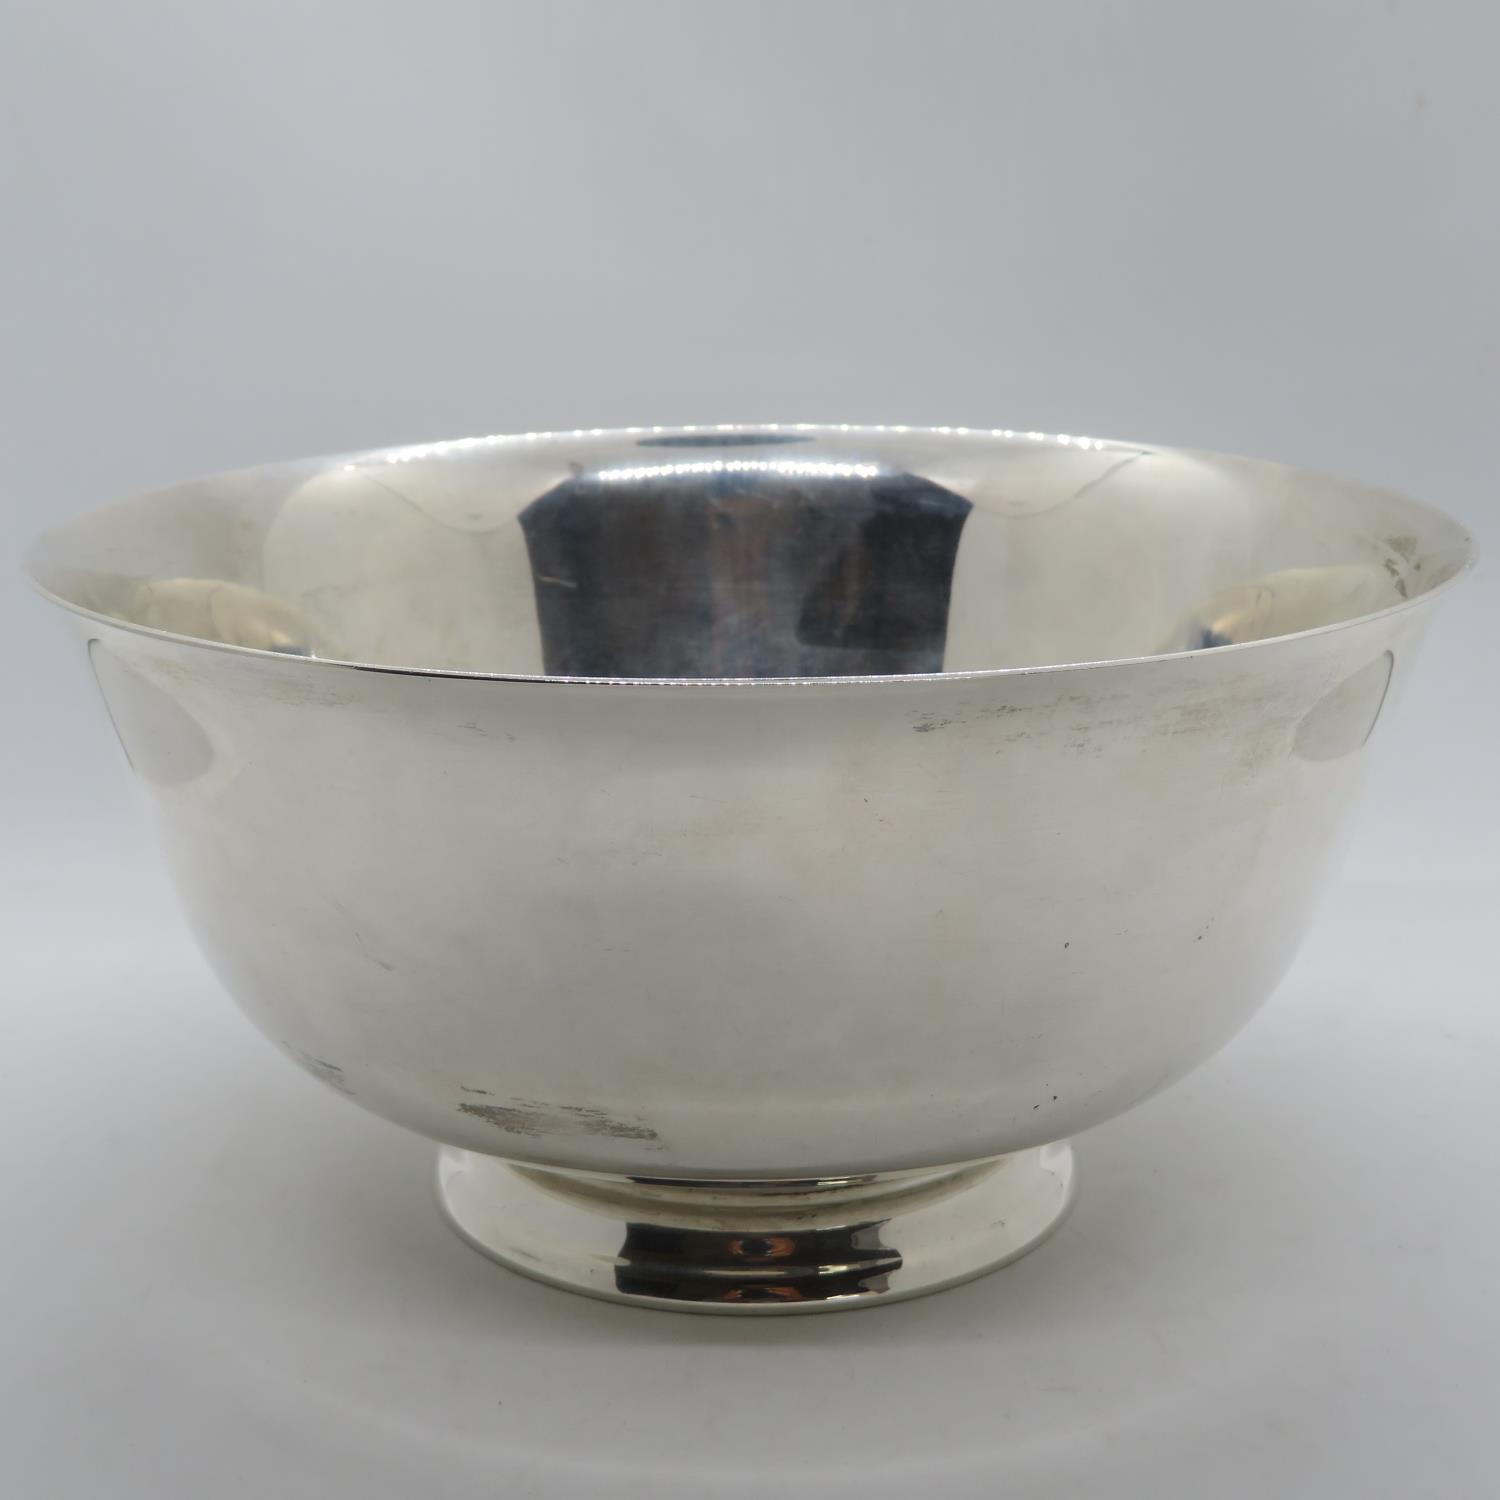 Large silver bowl by ~Royal Irish Silver Company with Dublin HM and later assayed in Sheffield 600g